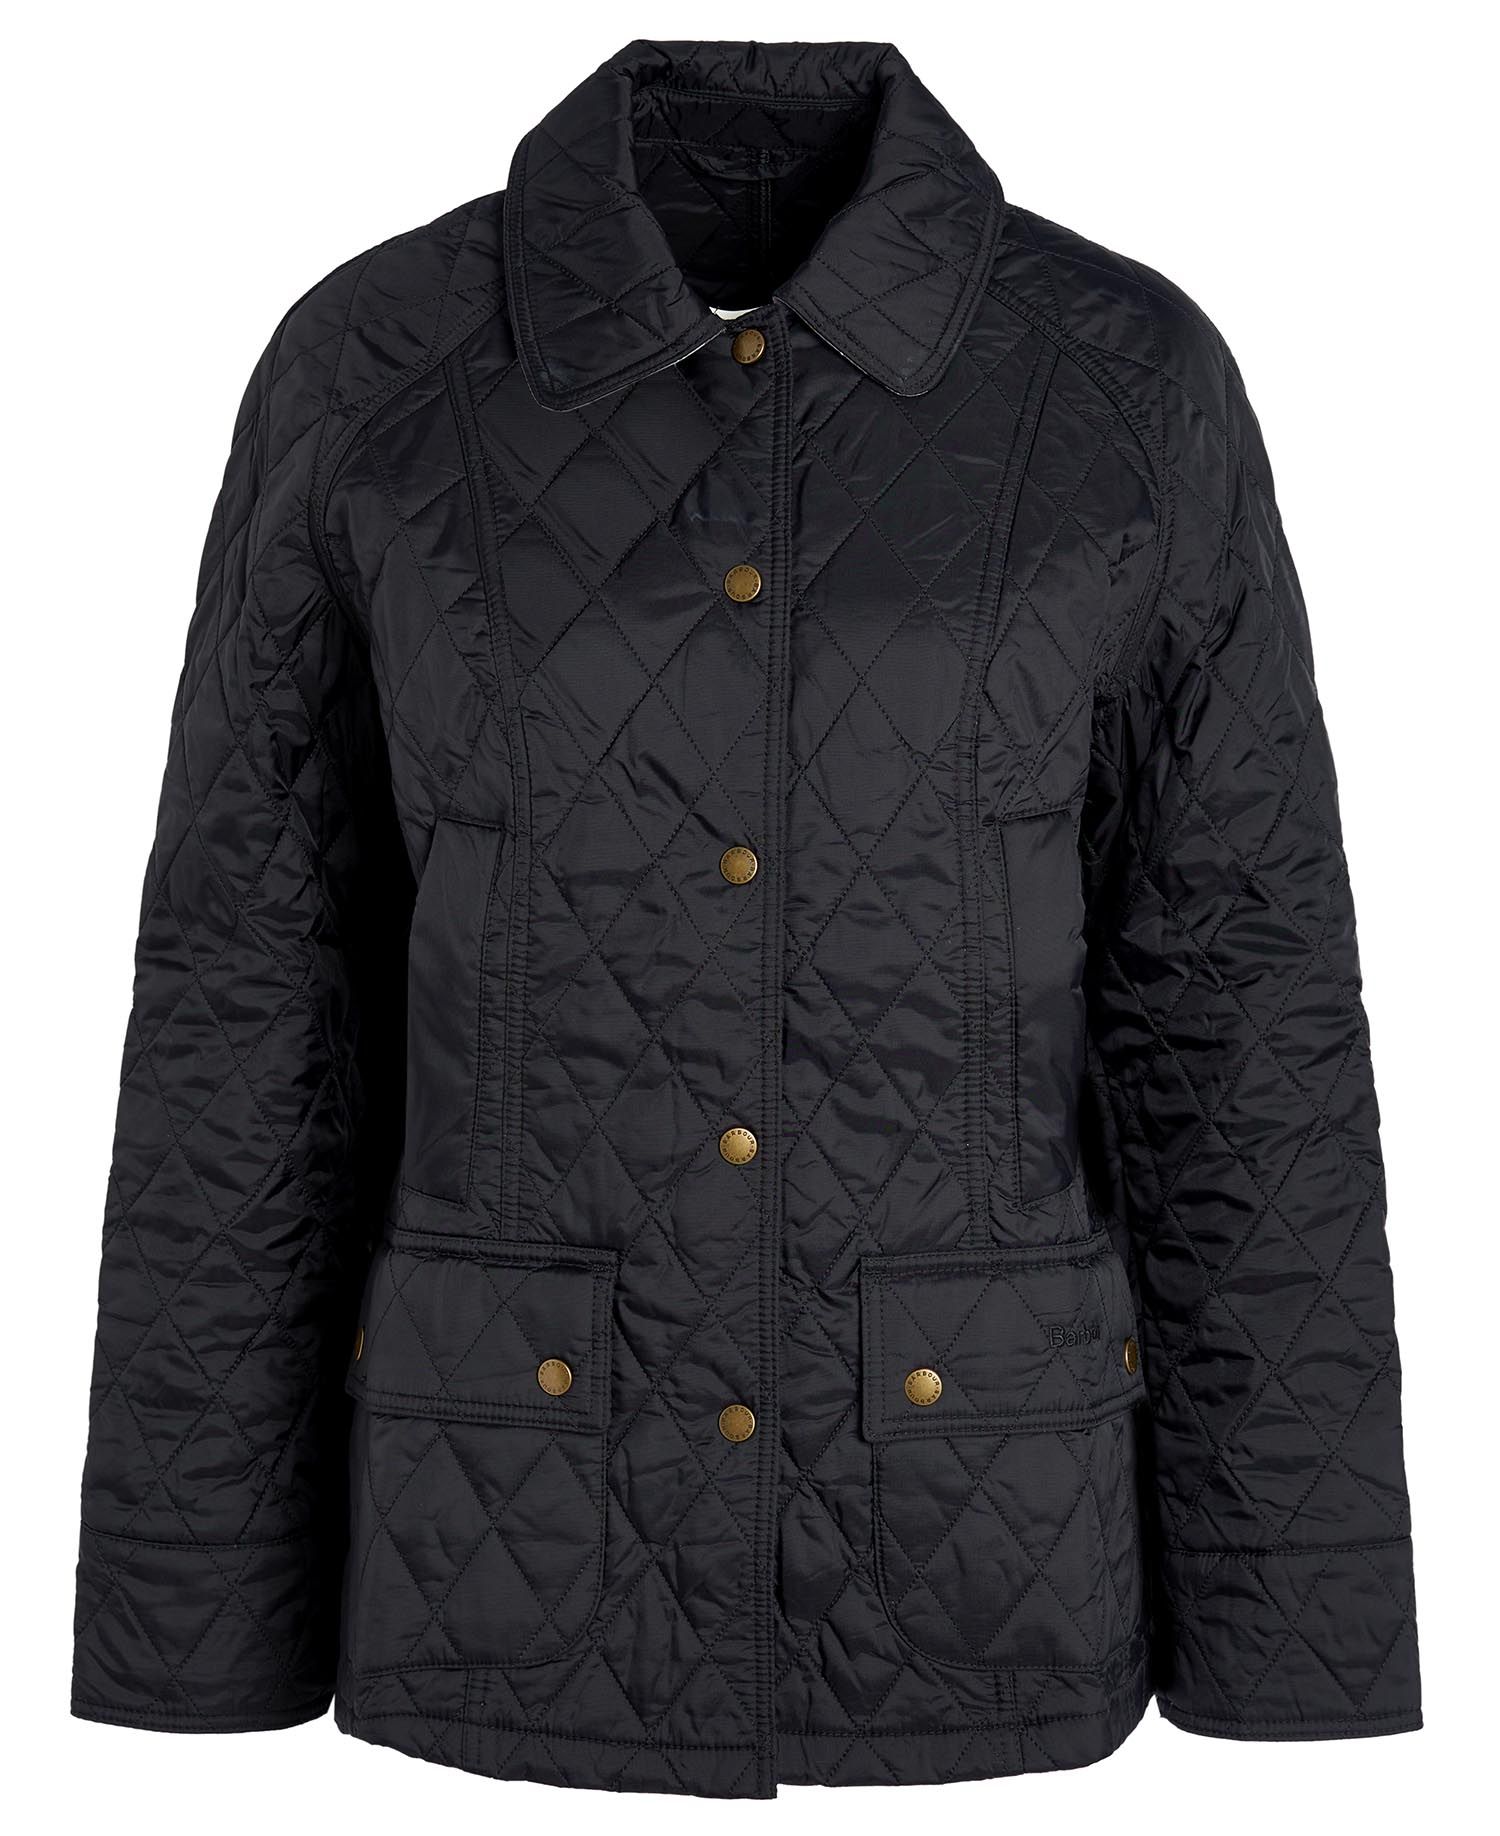 Shop the Barbour Summer Beadnell Quilted Jacket today. | Barbour